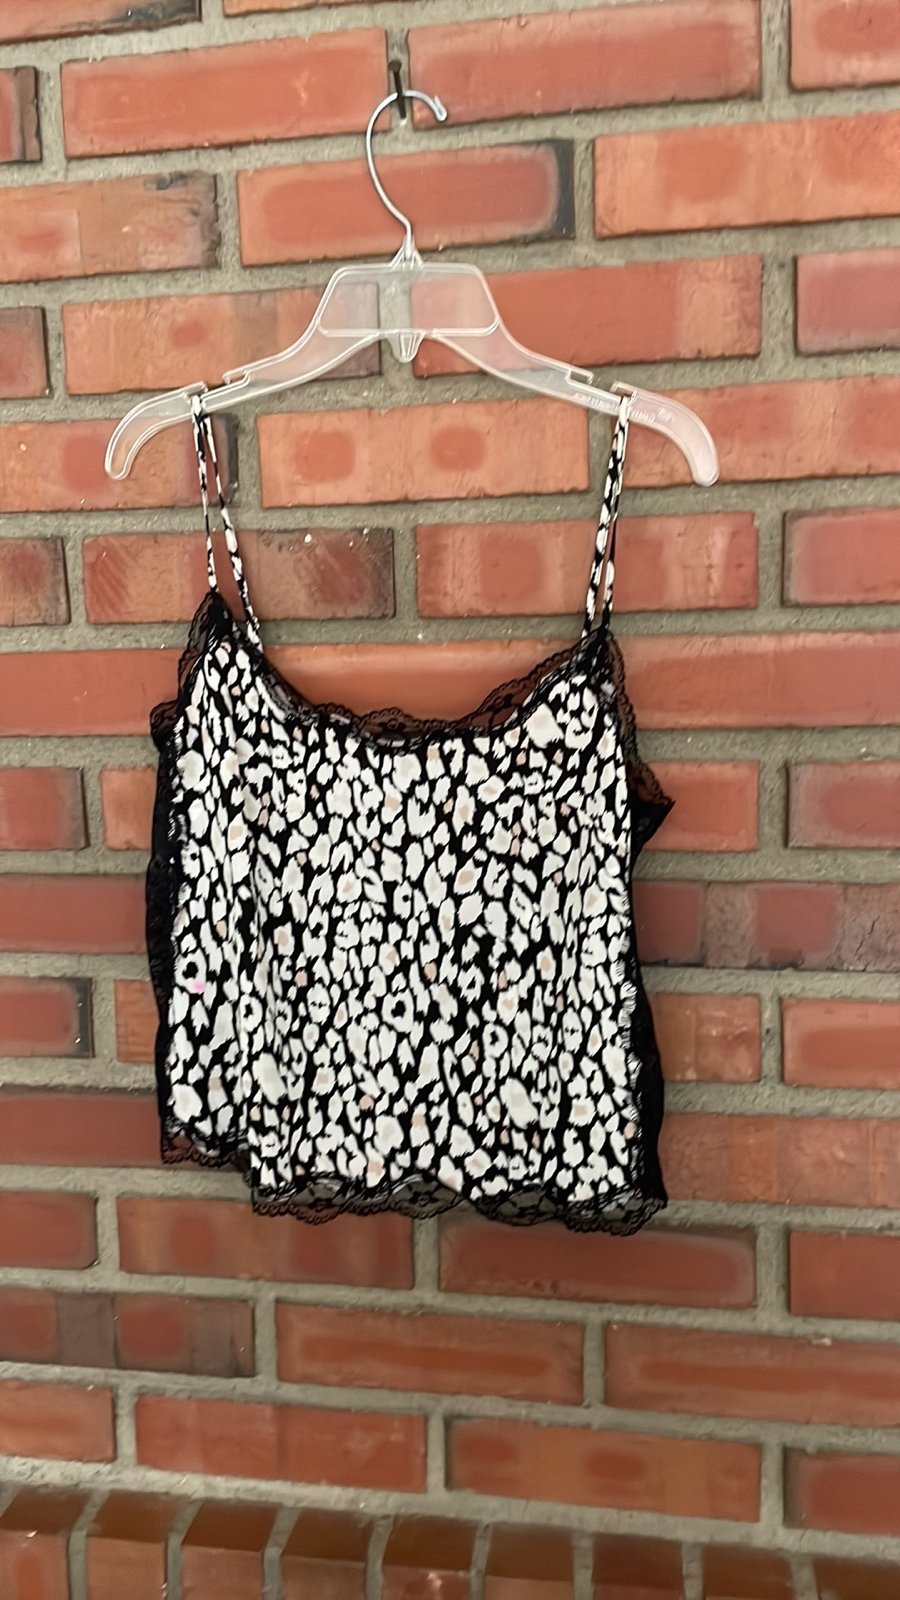 reasonable price Bebe leopard print camisole lace details small exc condition K8MA7cl71 Store Online